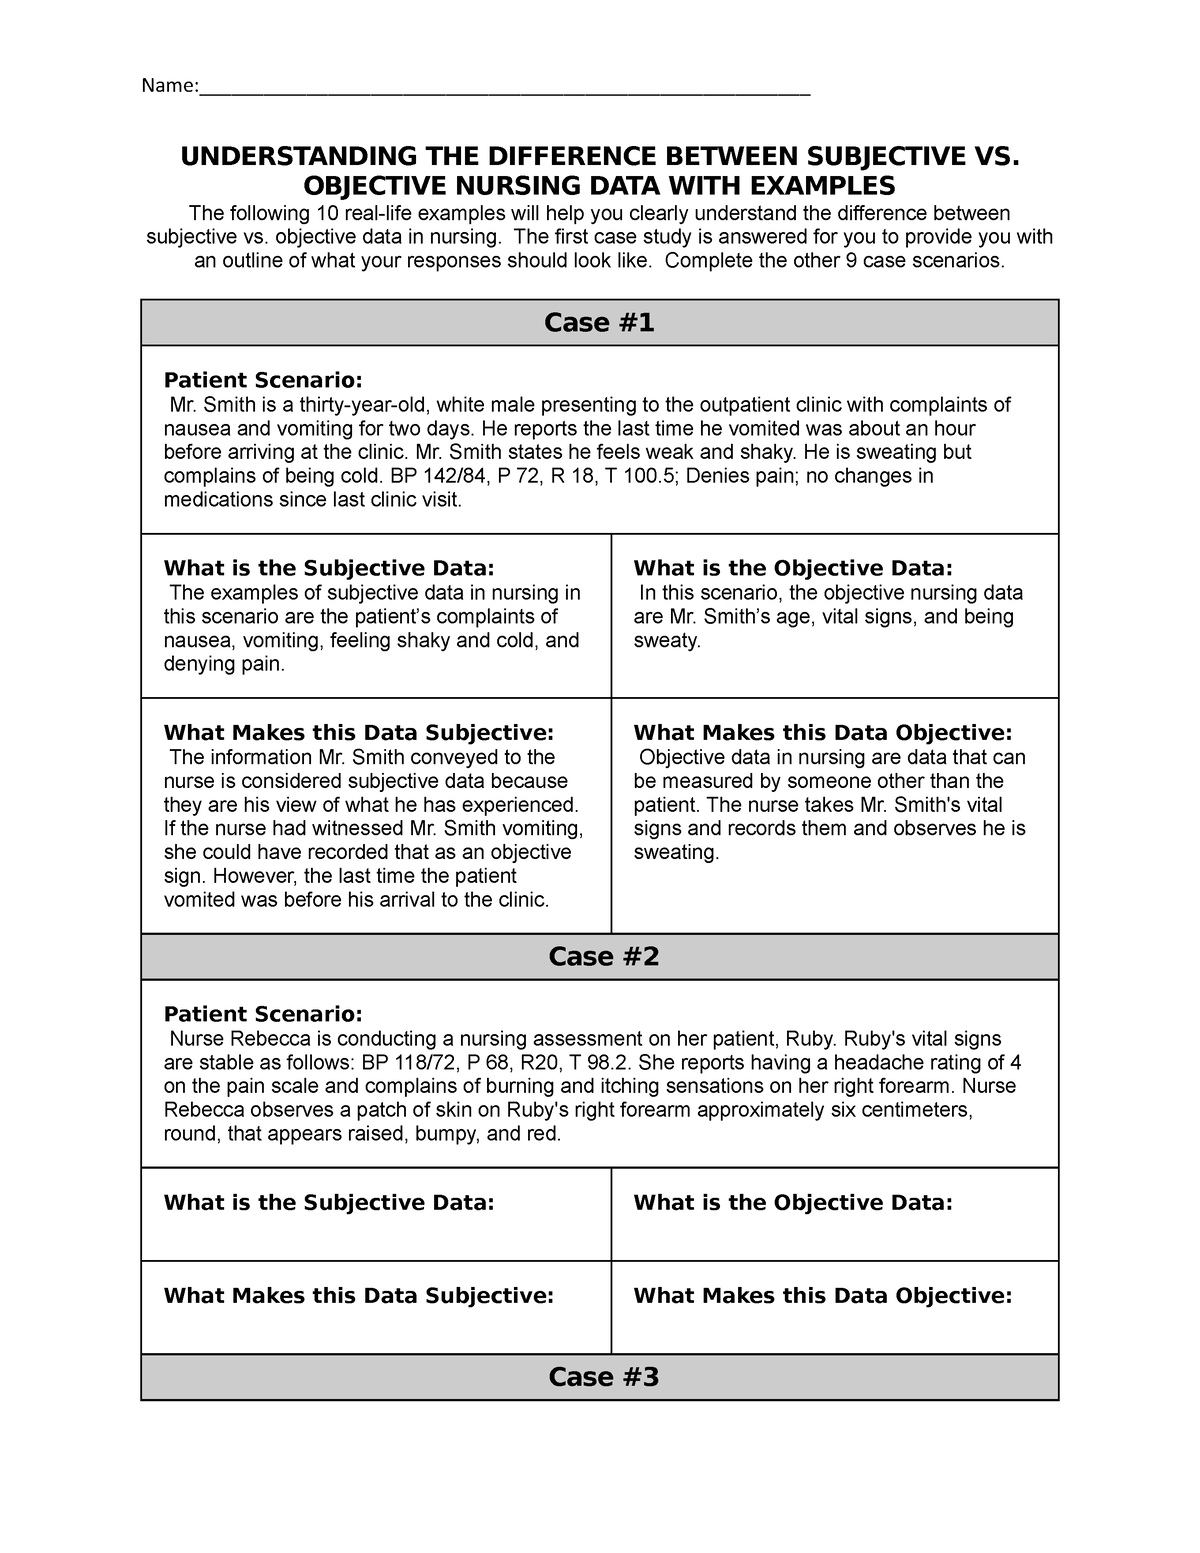 subjective-vs-objective-worksheet-understanding-the-difference